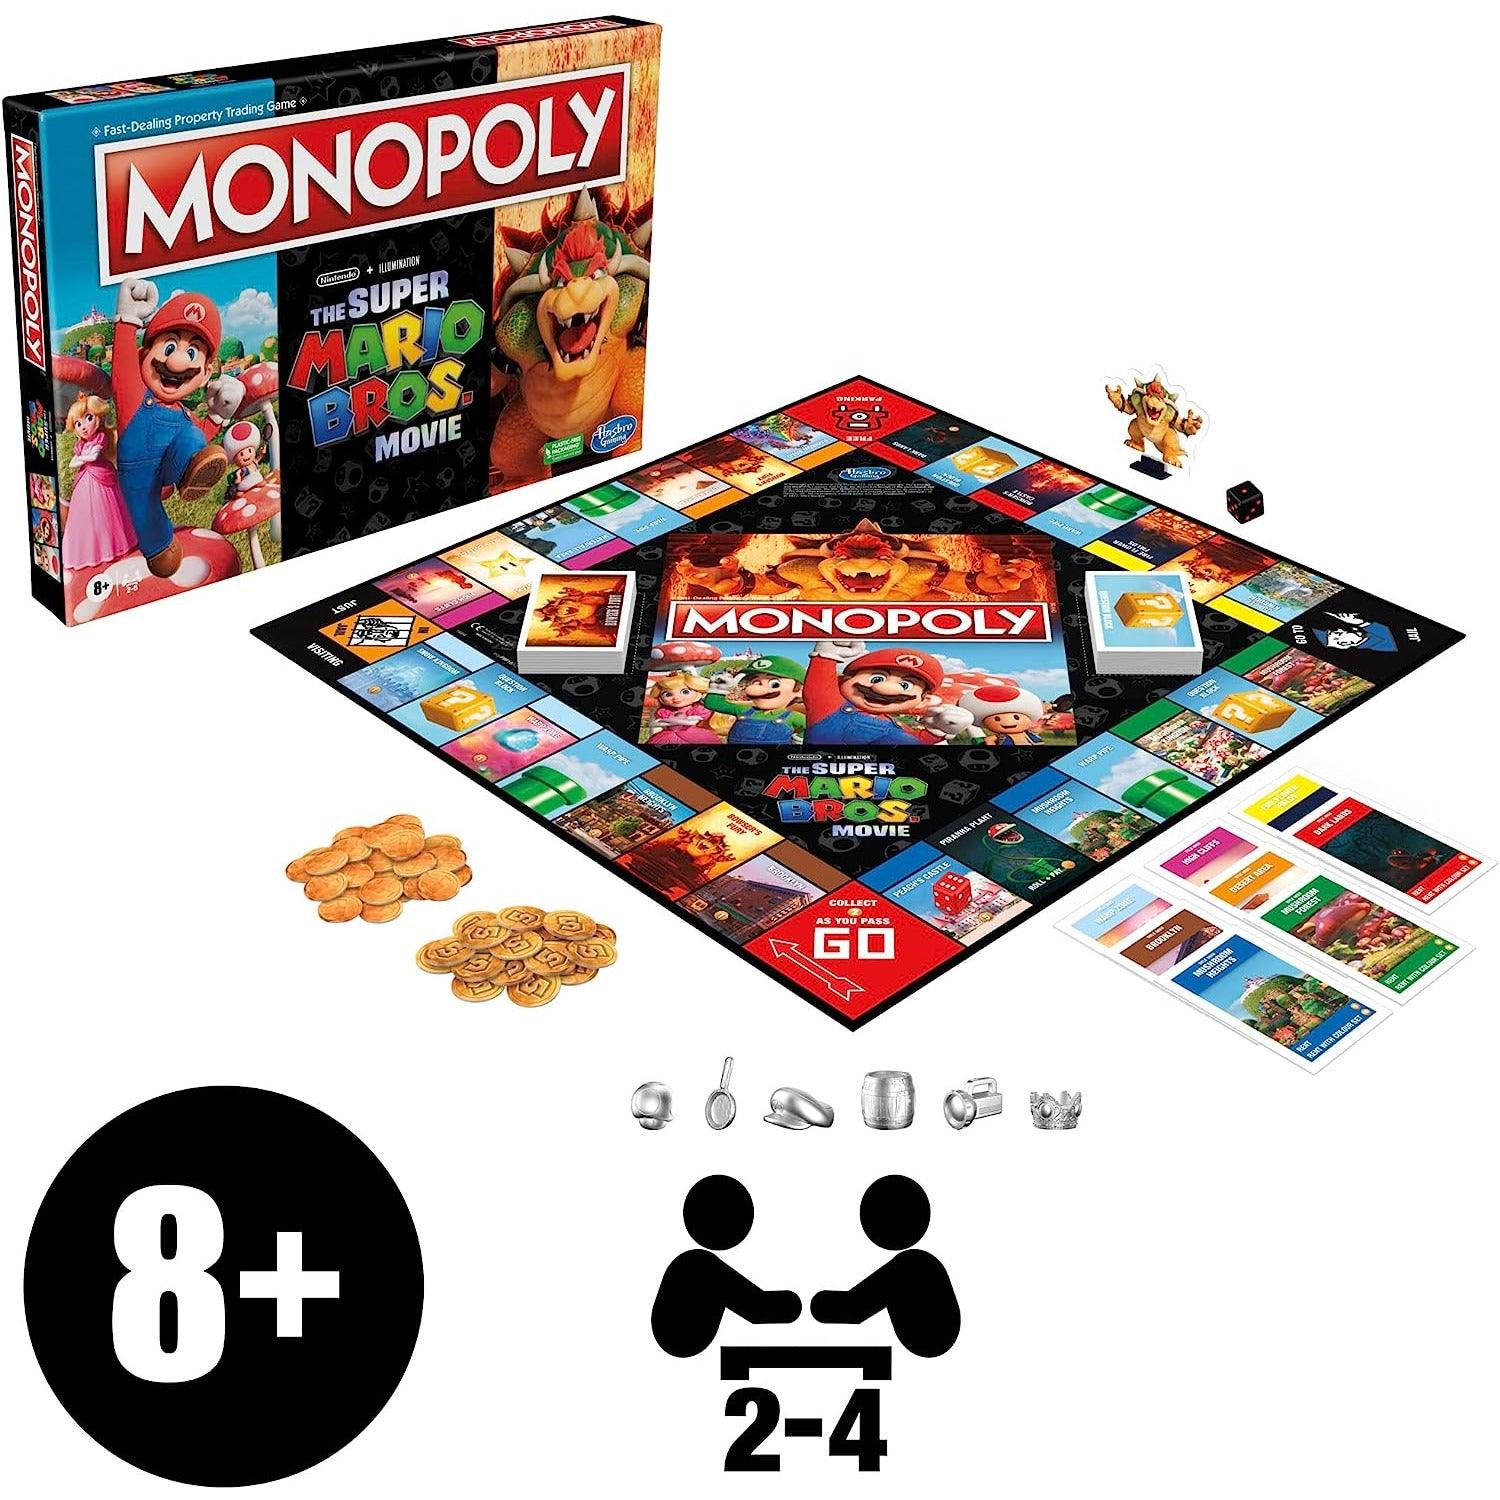 Monopoly The Super Mario Bros. Movie Edition Kids Board Game - 2-6 Players - BumbleToys - 8-13 Years, Boys, Card & Board Games, Monopoly, Pre-Order, Puzzle & Board & Card Games, Super Mario